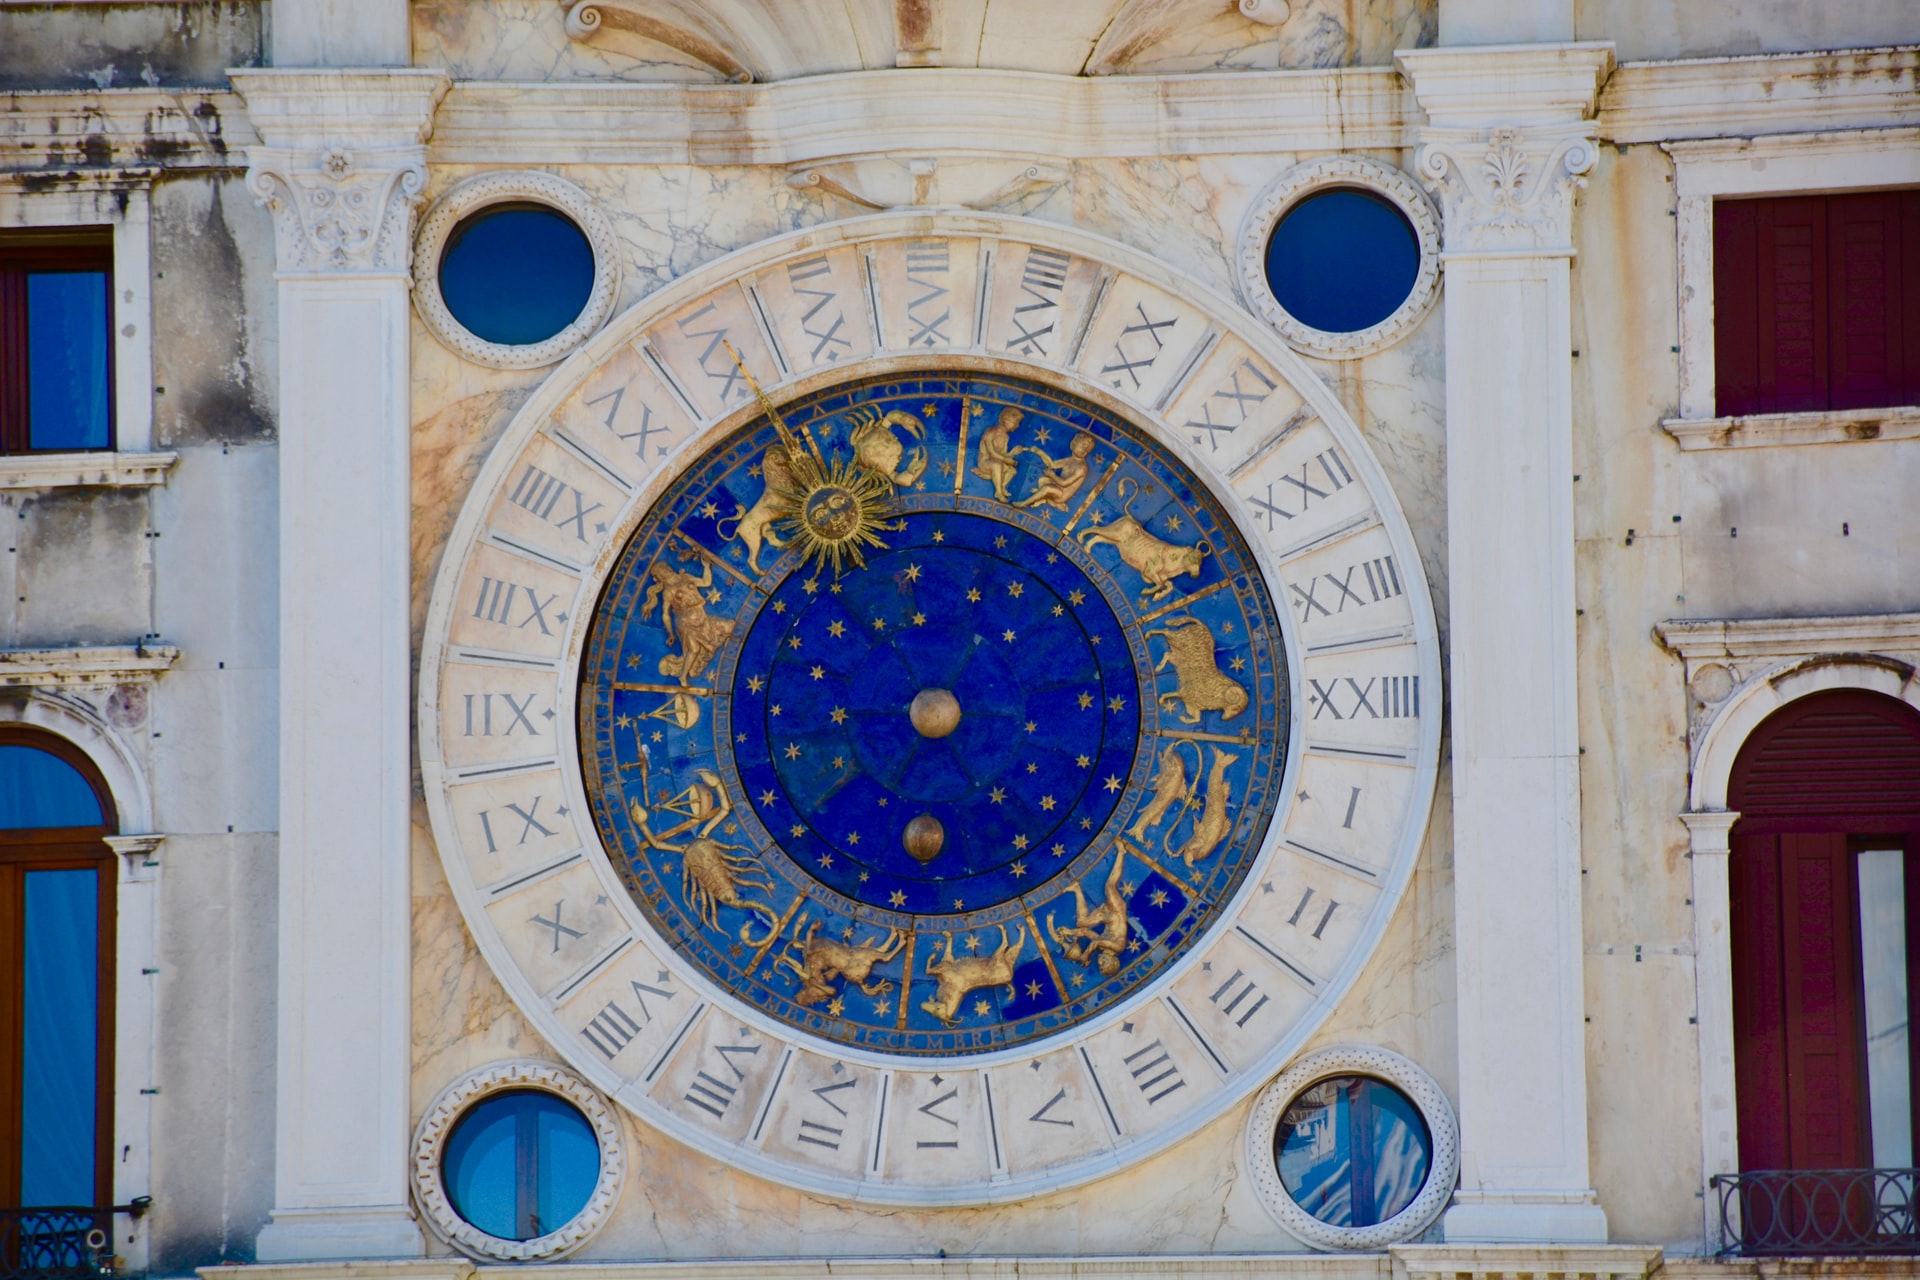 Blue Astrology clock with gold symbols made in stone on a white building 